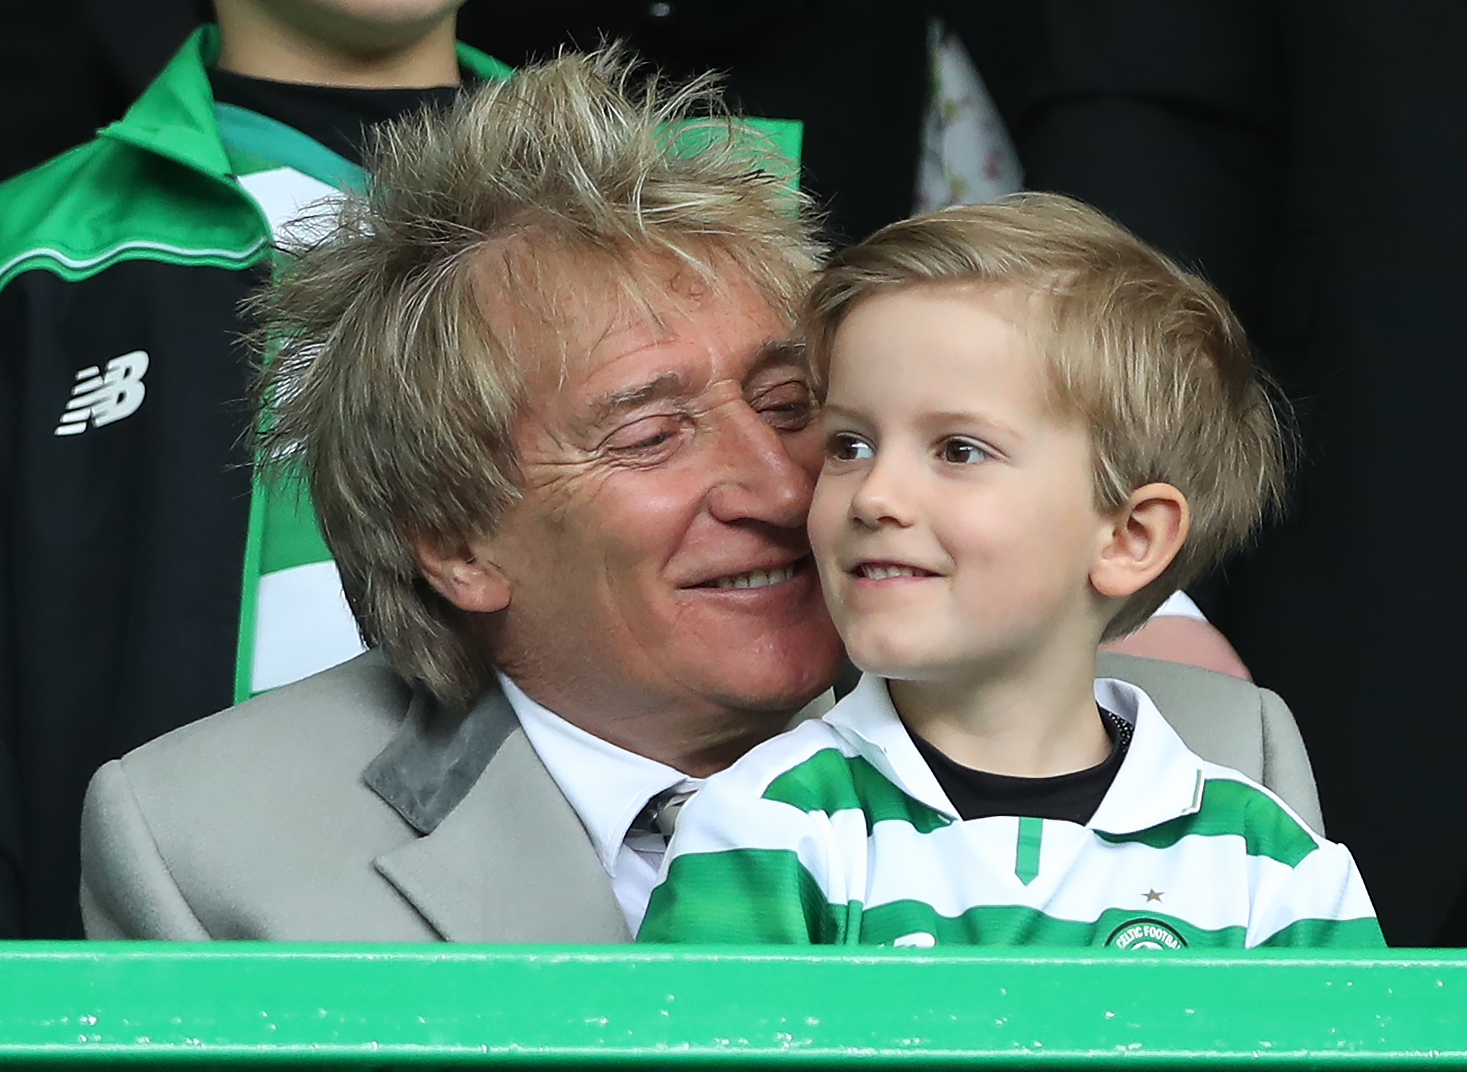 Rod and Aiden Stewart are seen during the Ladbrokes Scottish Premiership match between Celtic and Rangers in Glasgow, Scotland, on March 12, 2017. | Source: Getty Images